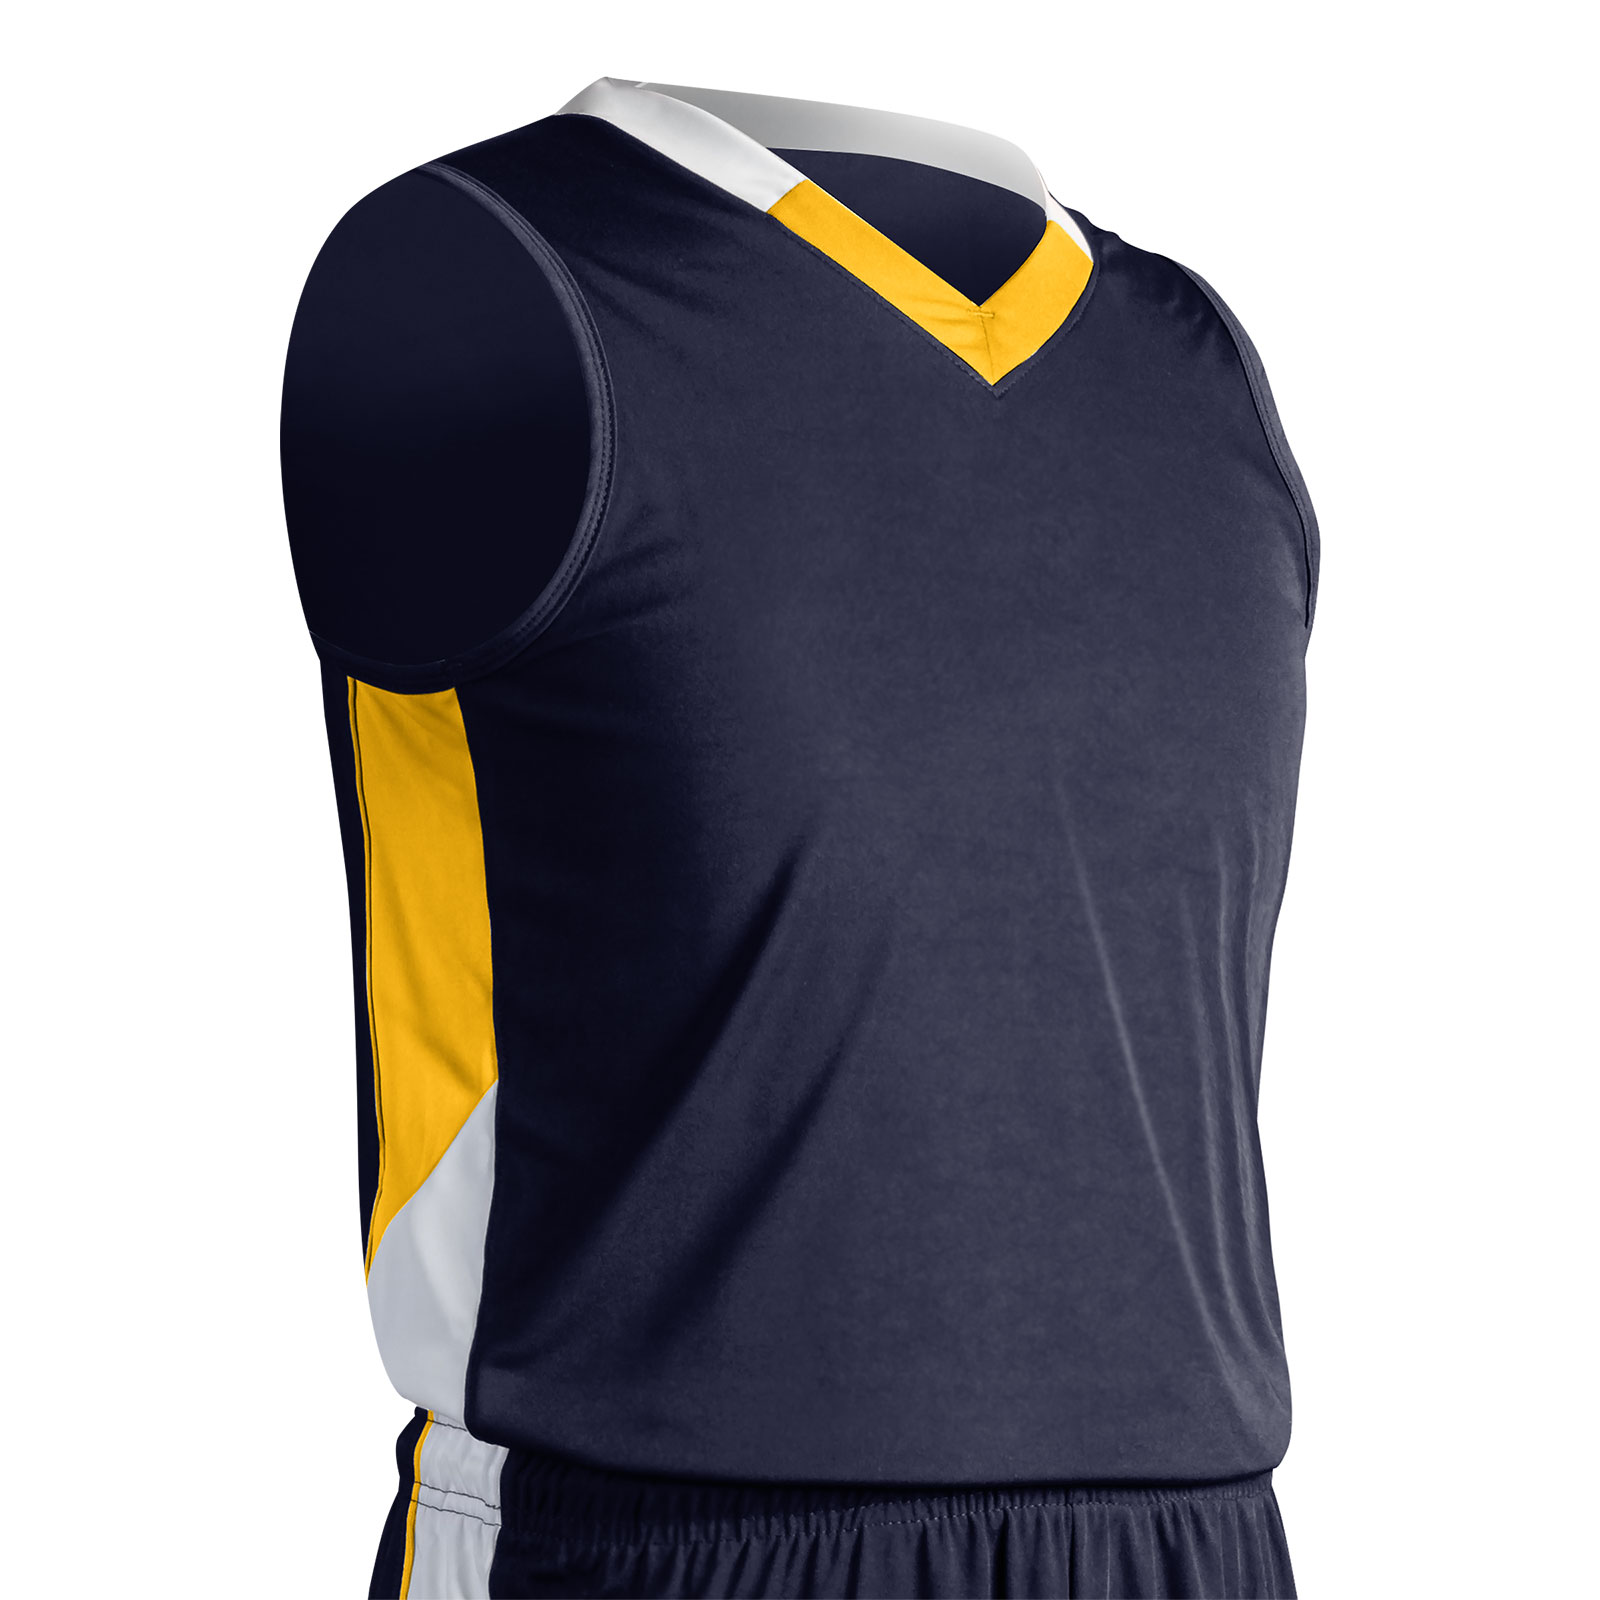 rebel basketball jersey navy and gold